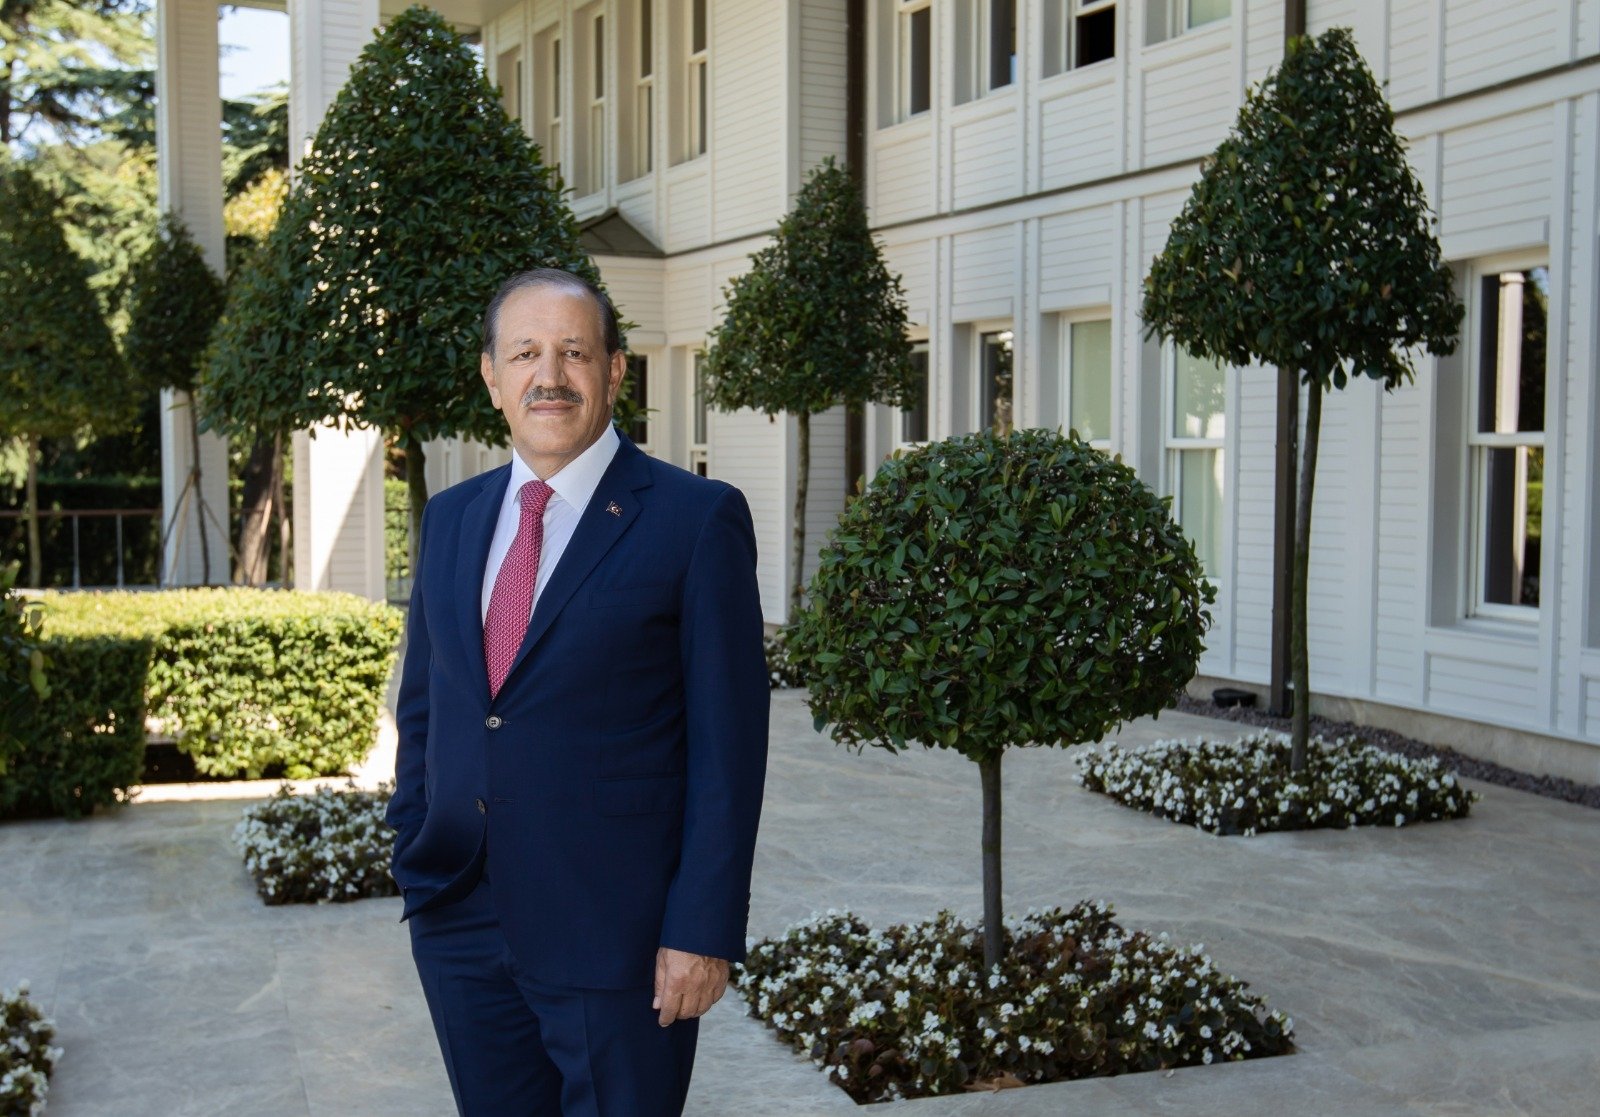 Cemal Kalyoncu, chairman of the board of Kalyon Holding. (Courtesy of Kalyon Holding)